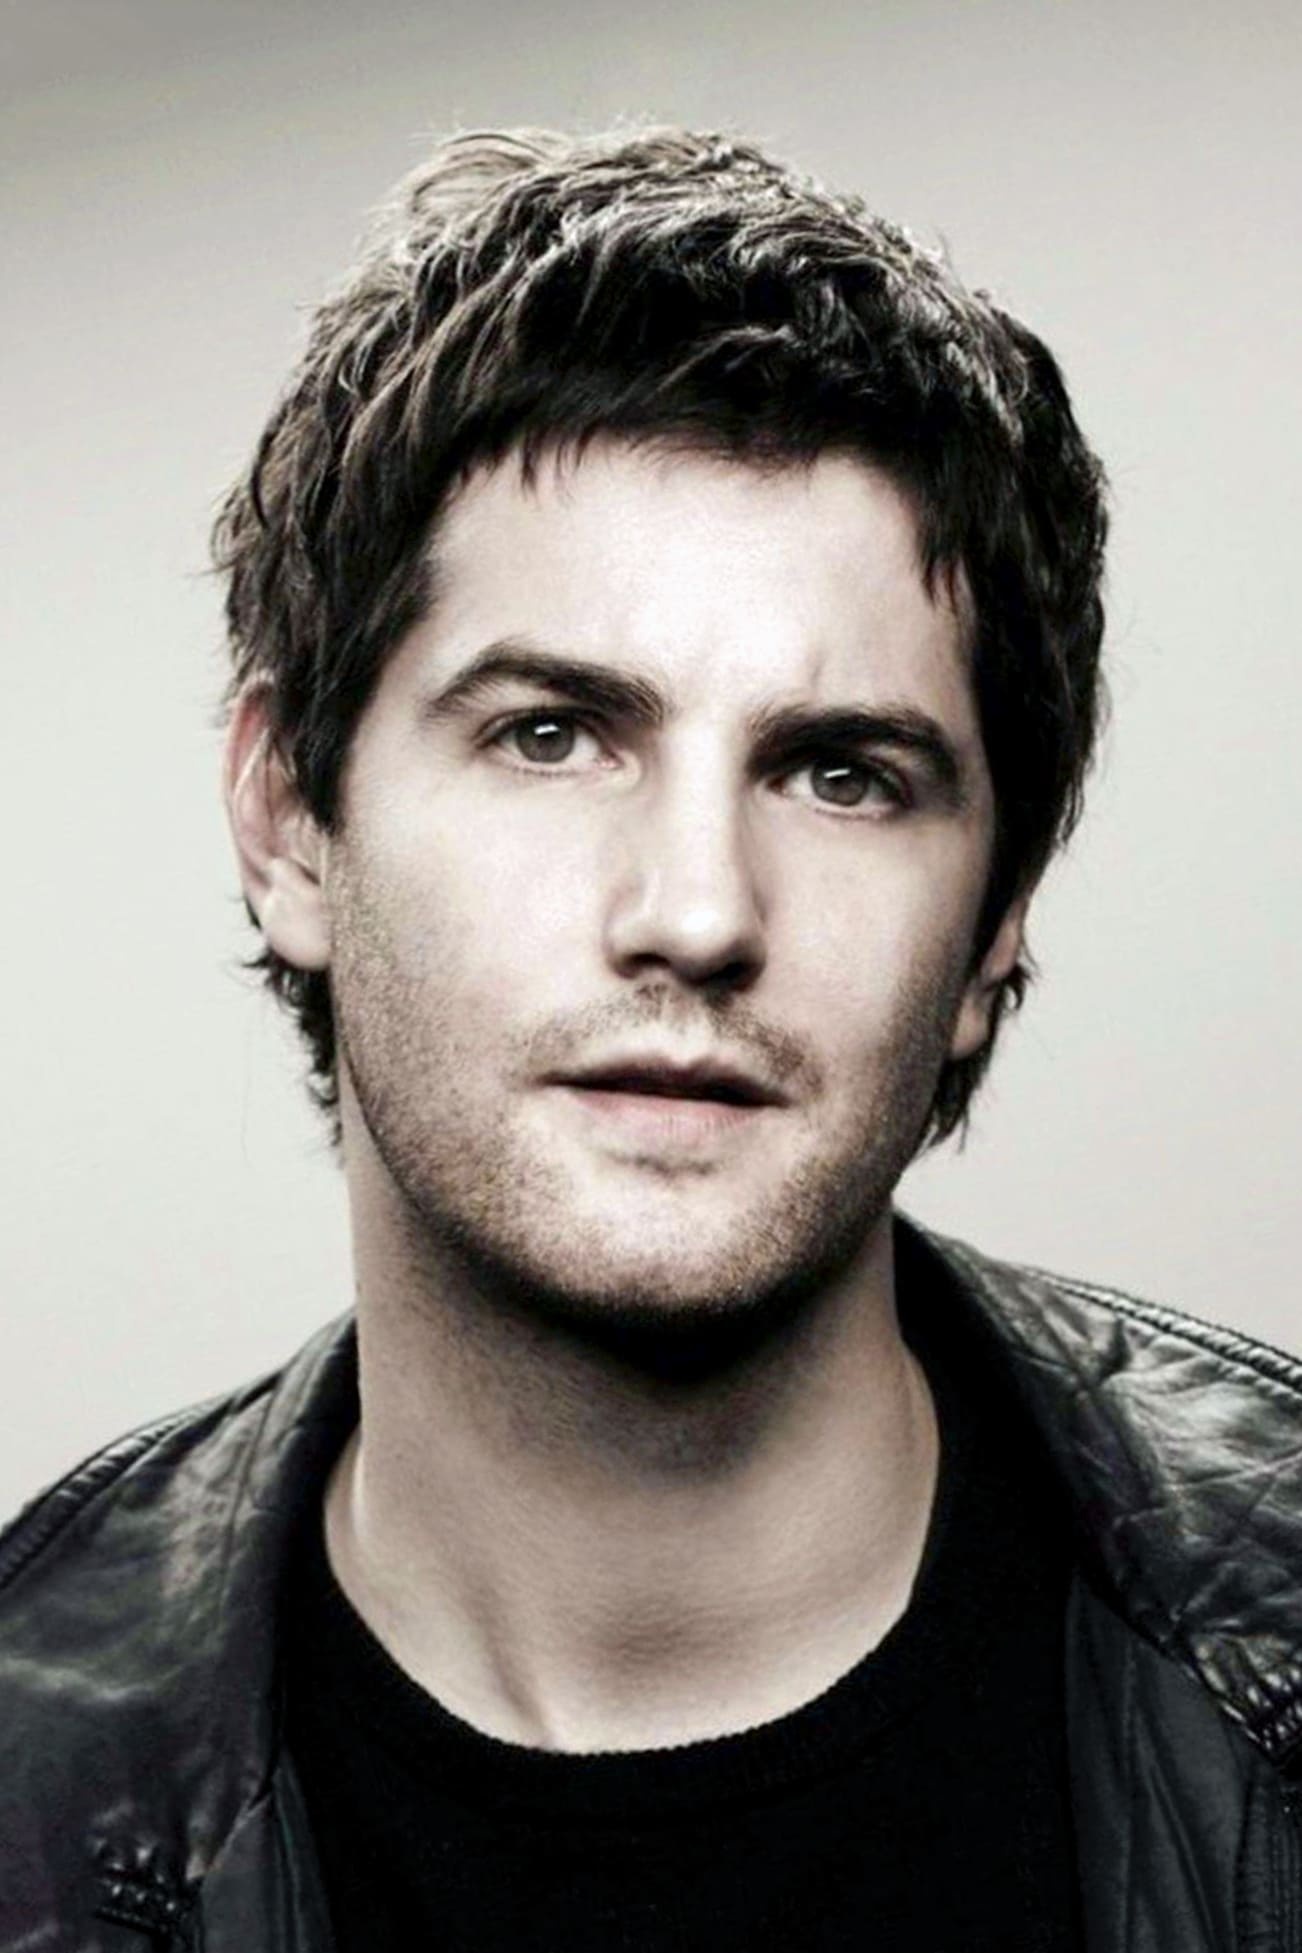 Jim Sturgess Movies, Must-watch films, Online streaming recommendations, Acting brilliance, 1310x1960 HD Handy